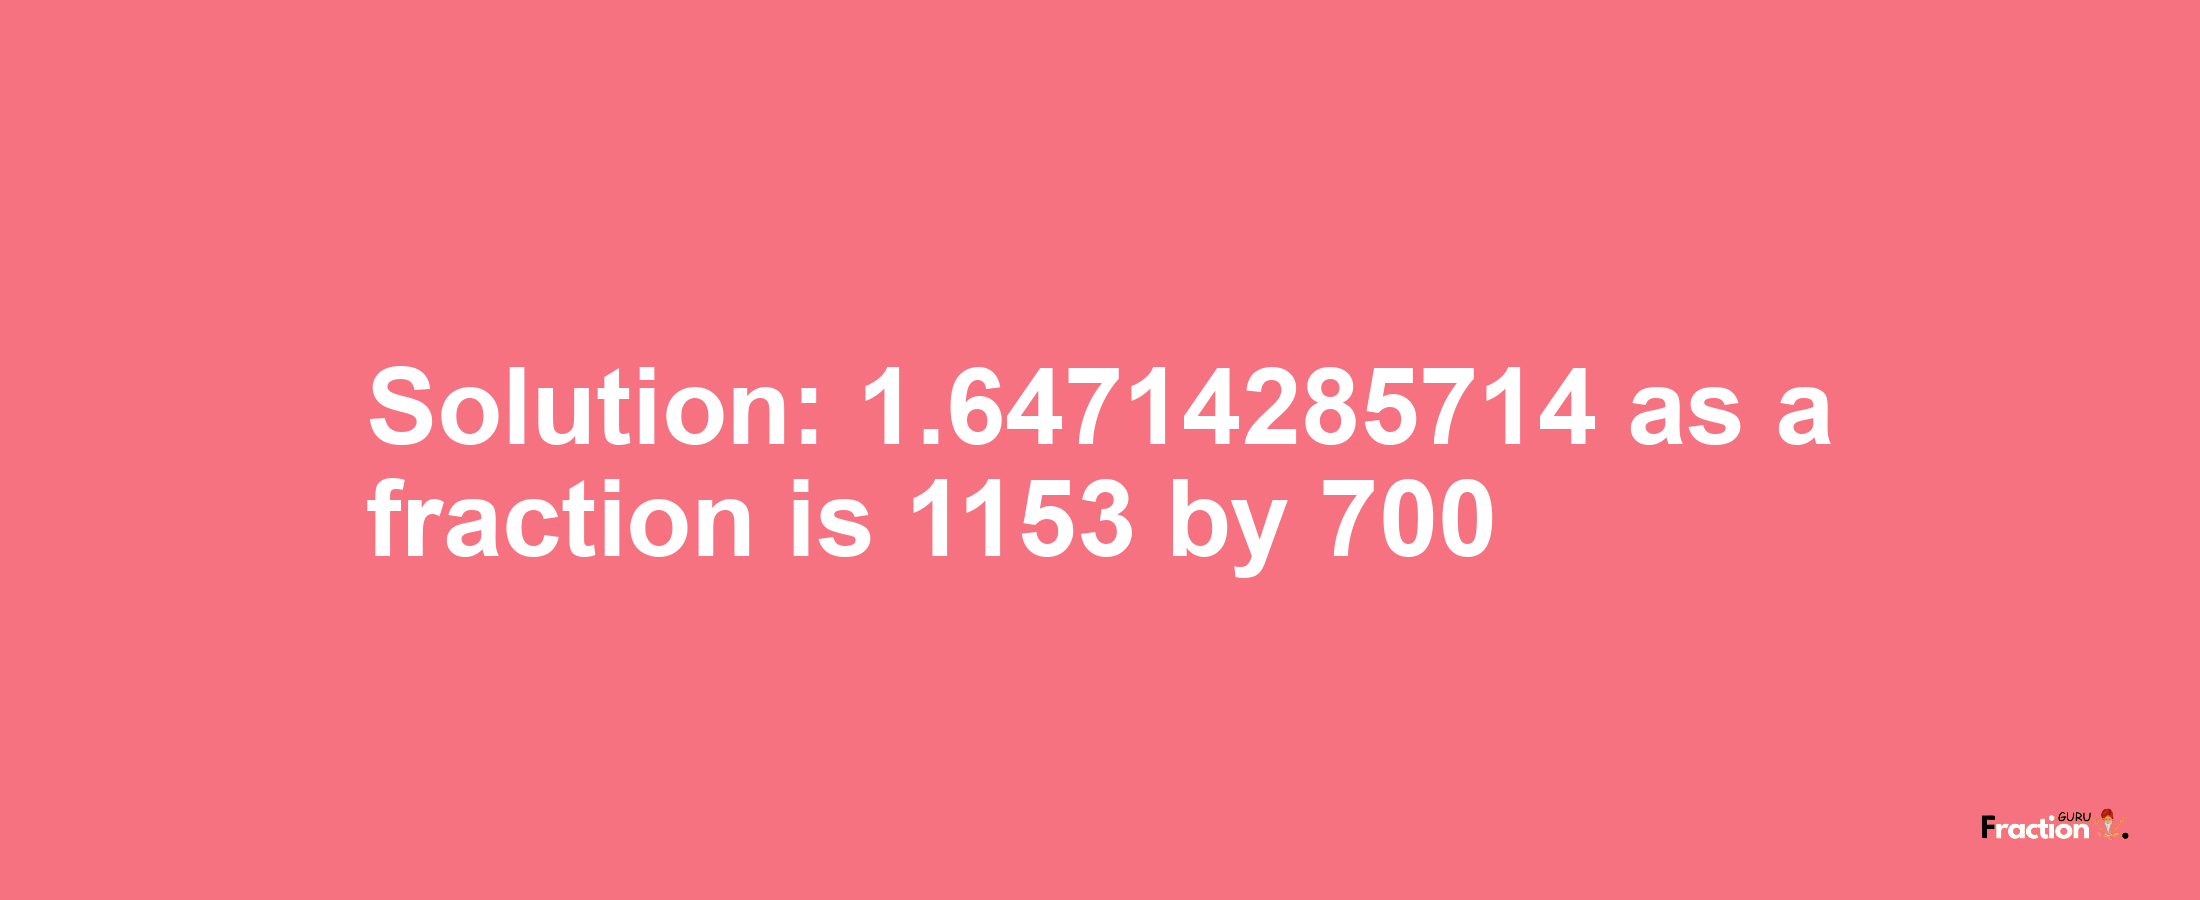 Solution:1.64714285714 as a fraction is 1153/700